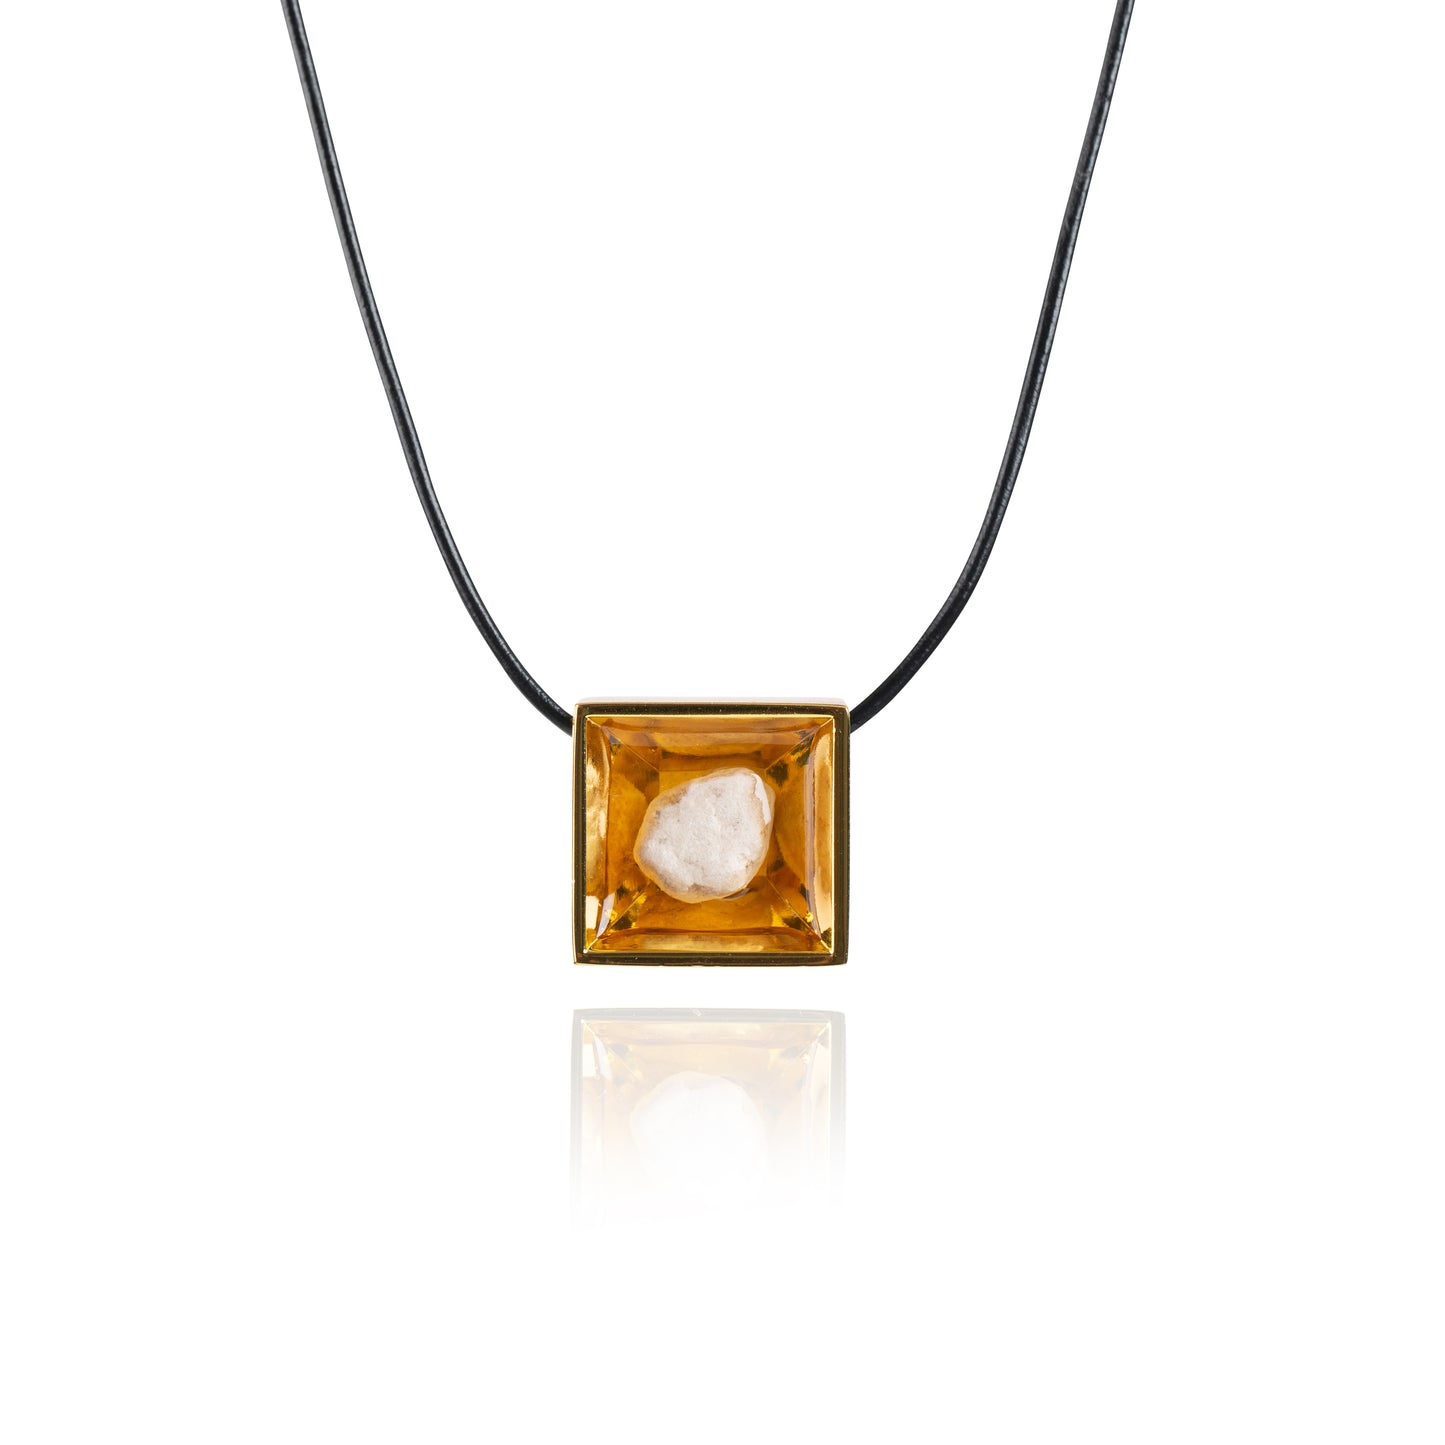 A small natural tan stone sitting in the middle of a square shaped metal pendant in a gold color. The pendant is hanging on a black leather necklace.